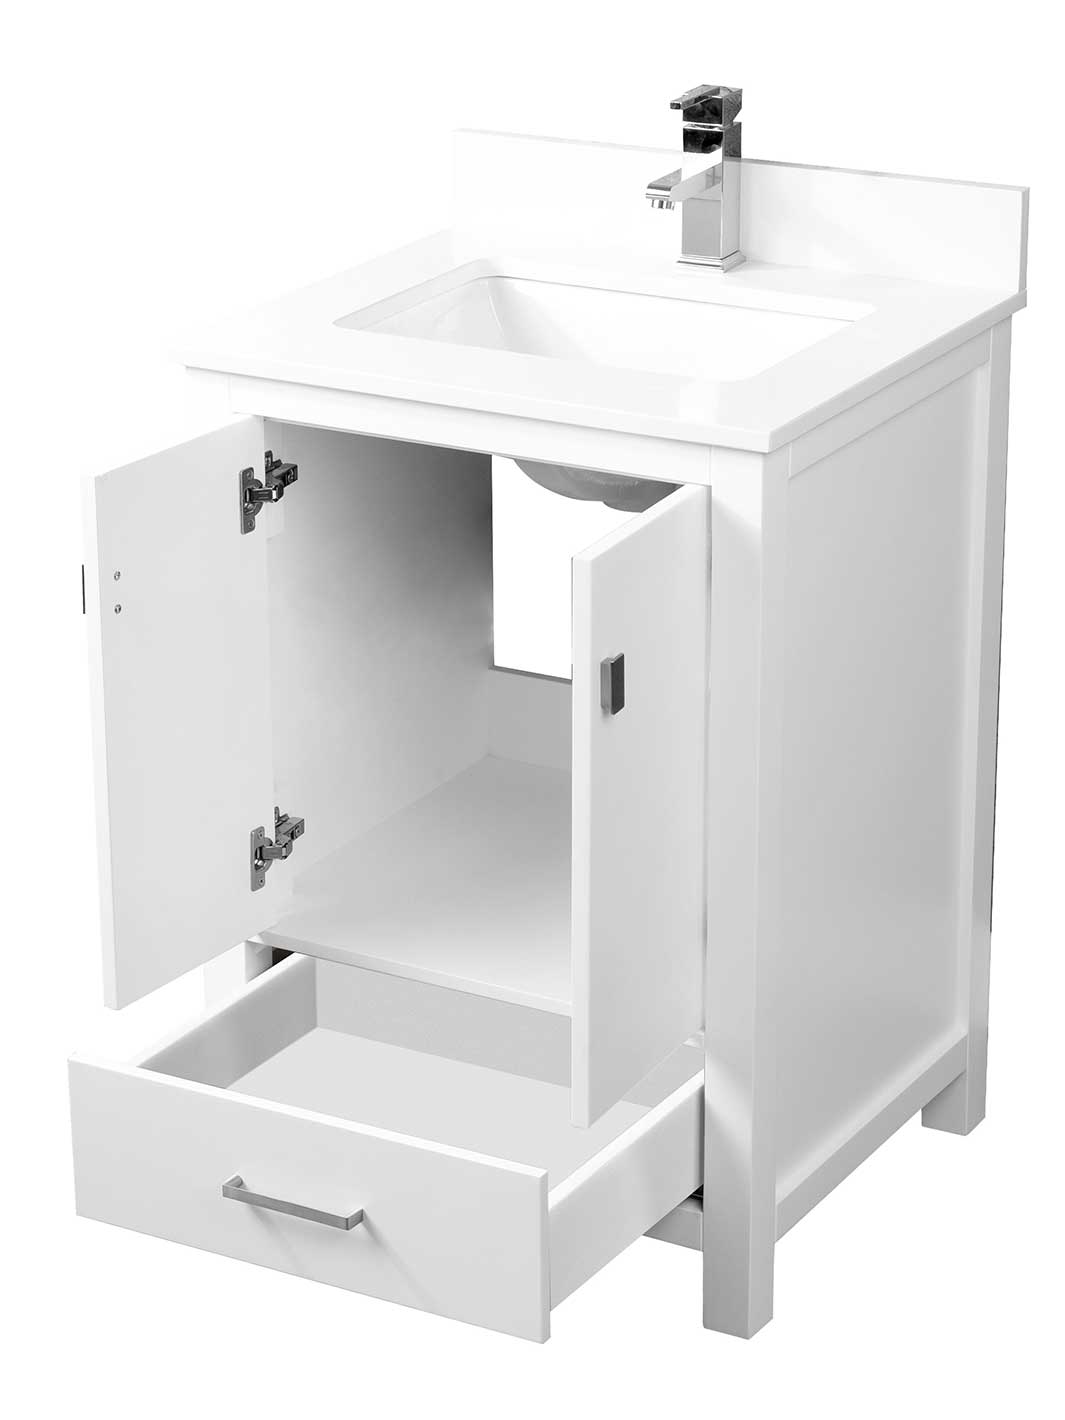 white vanity cupboard and drawer with white quartz countertop and chrome faucet